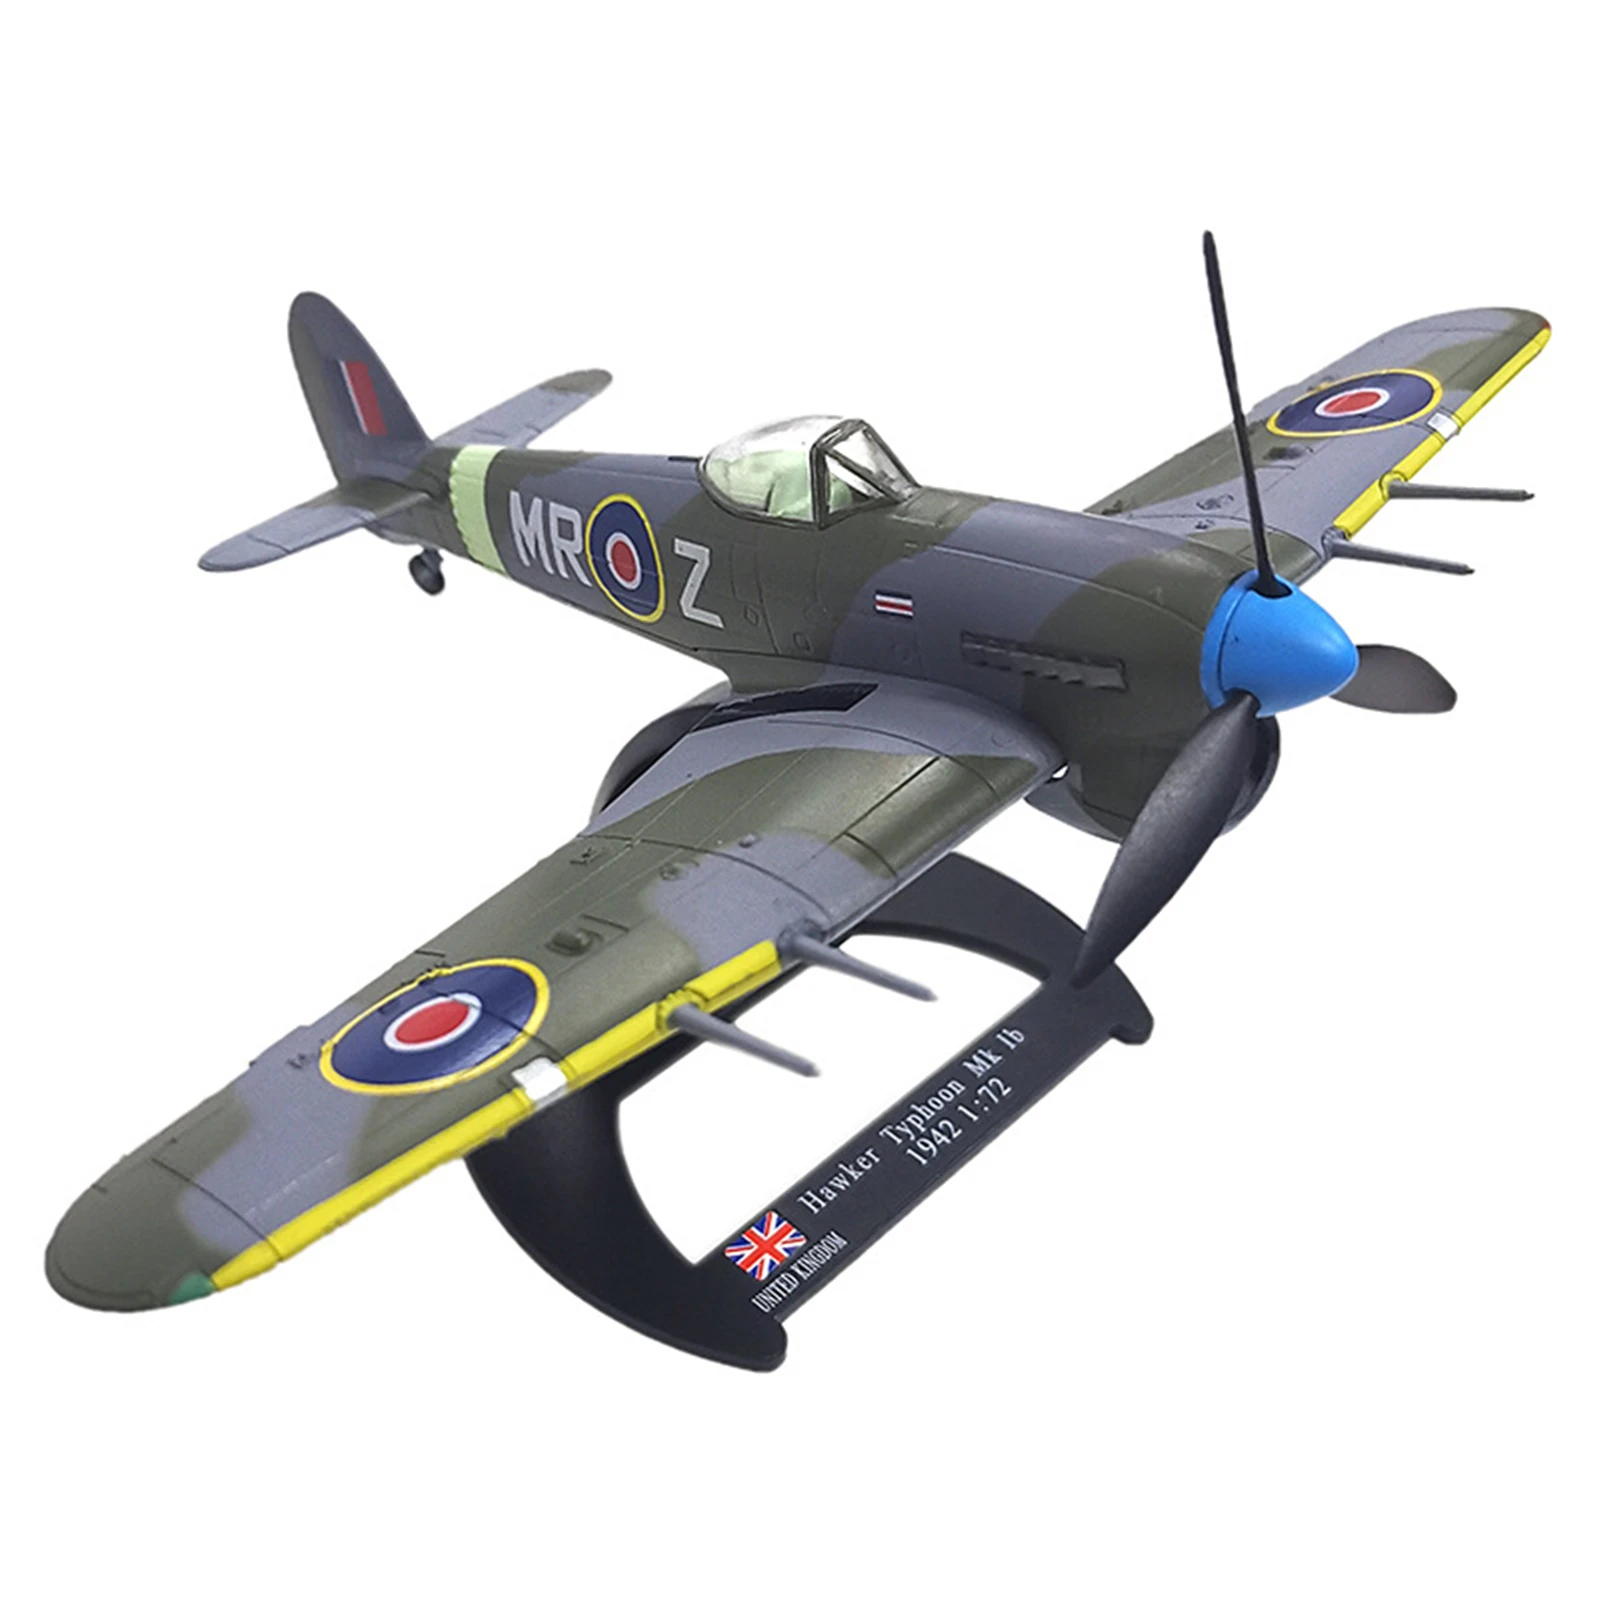 

Scale 1/72 Fighter Model, UK Hawker Typhoon Military Aircraft Replica Aviation World War WW2 Plane Collectible Toys for Boys